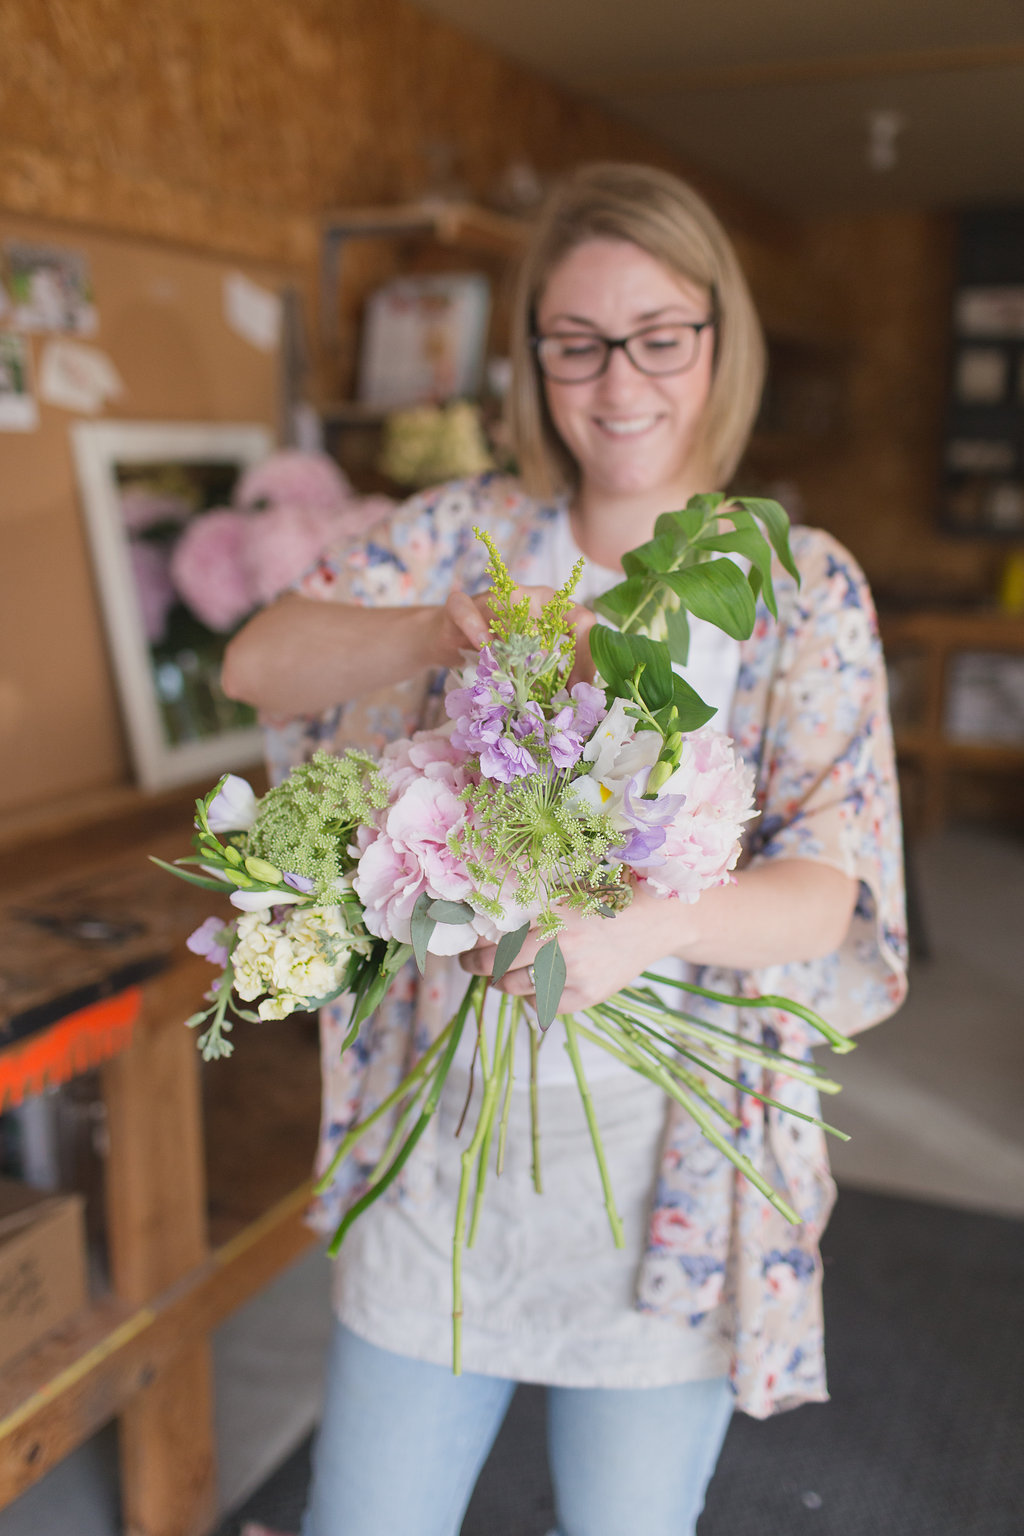 Behind the Scenes at a Florist Shop